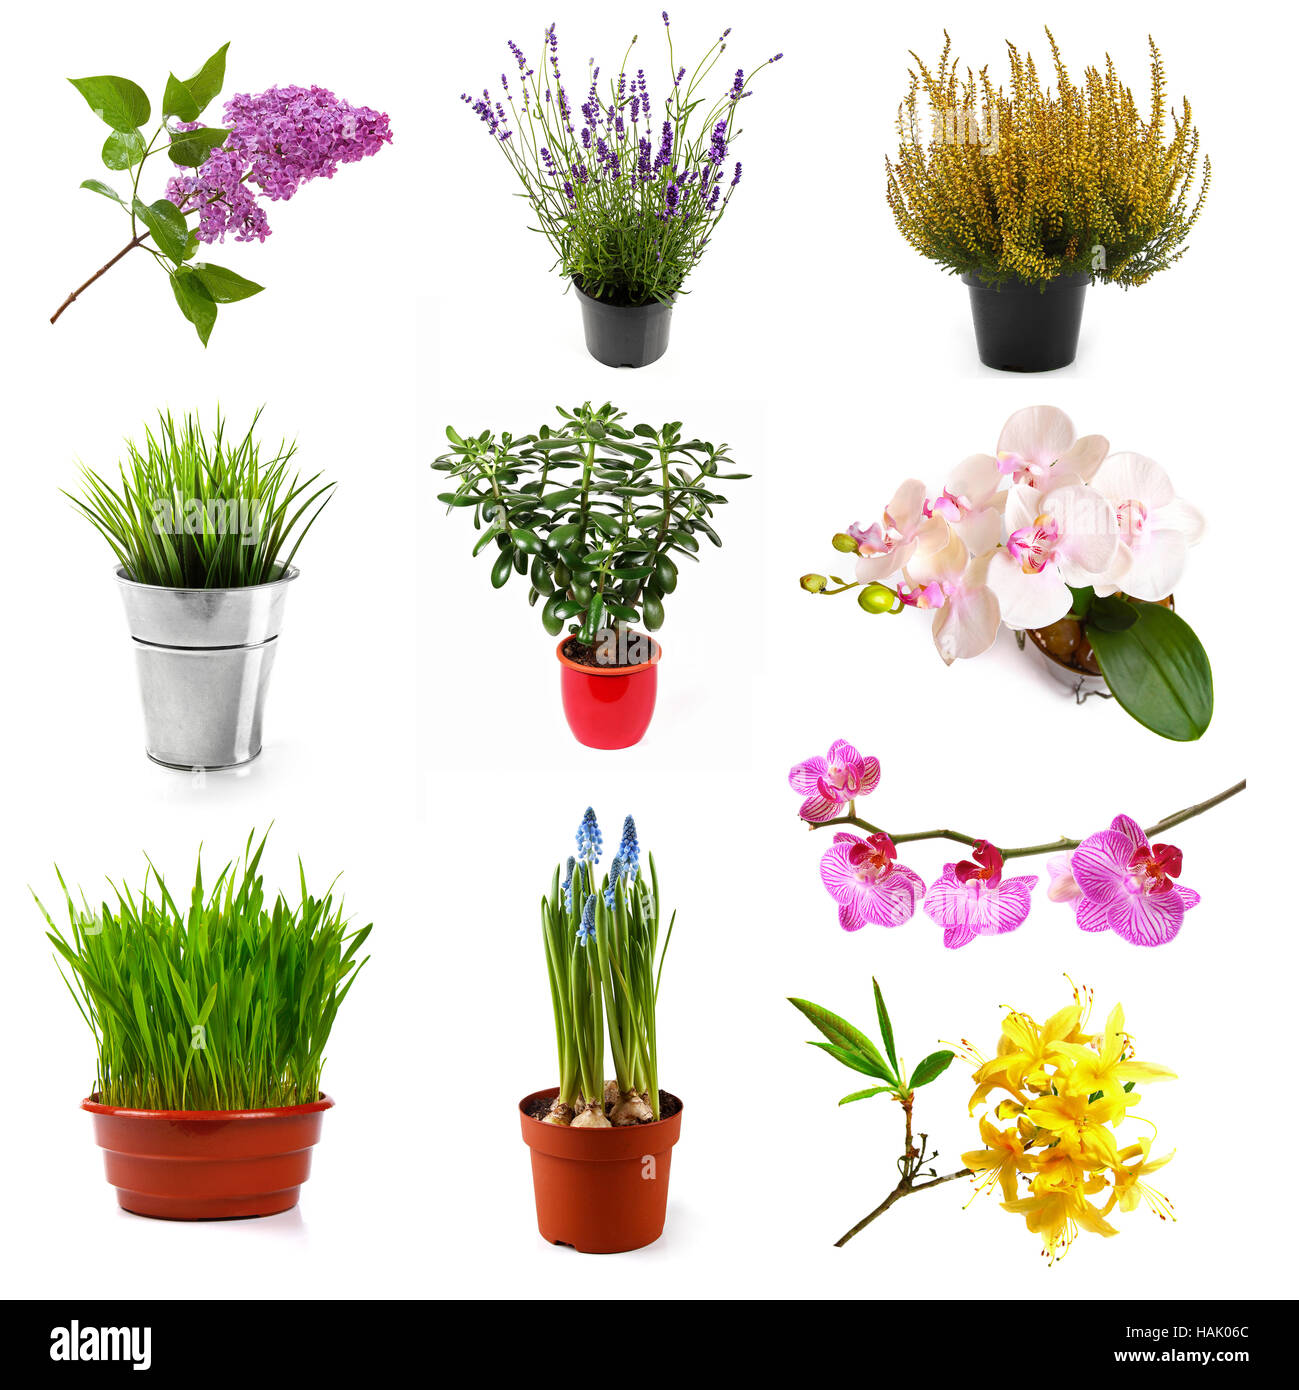 collection with different flowers and plants, isolated on white Stock Photo